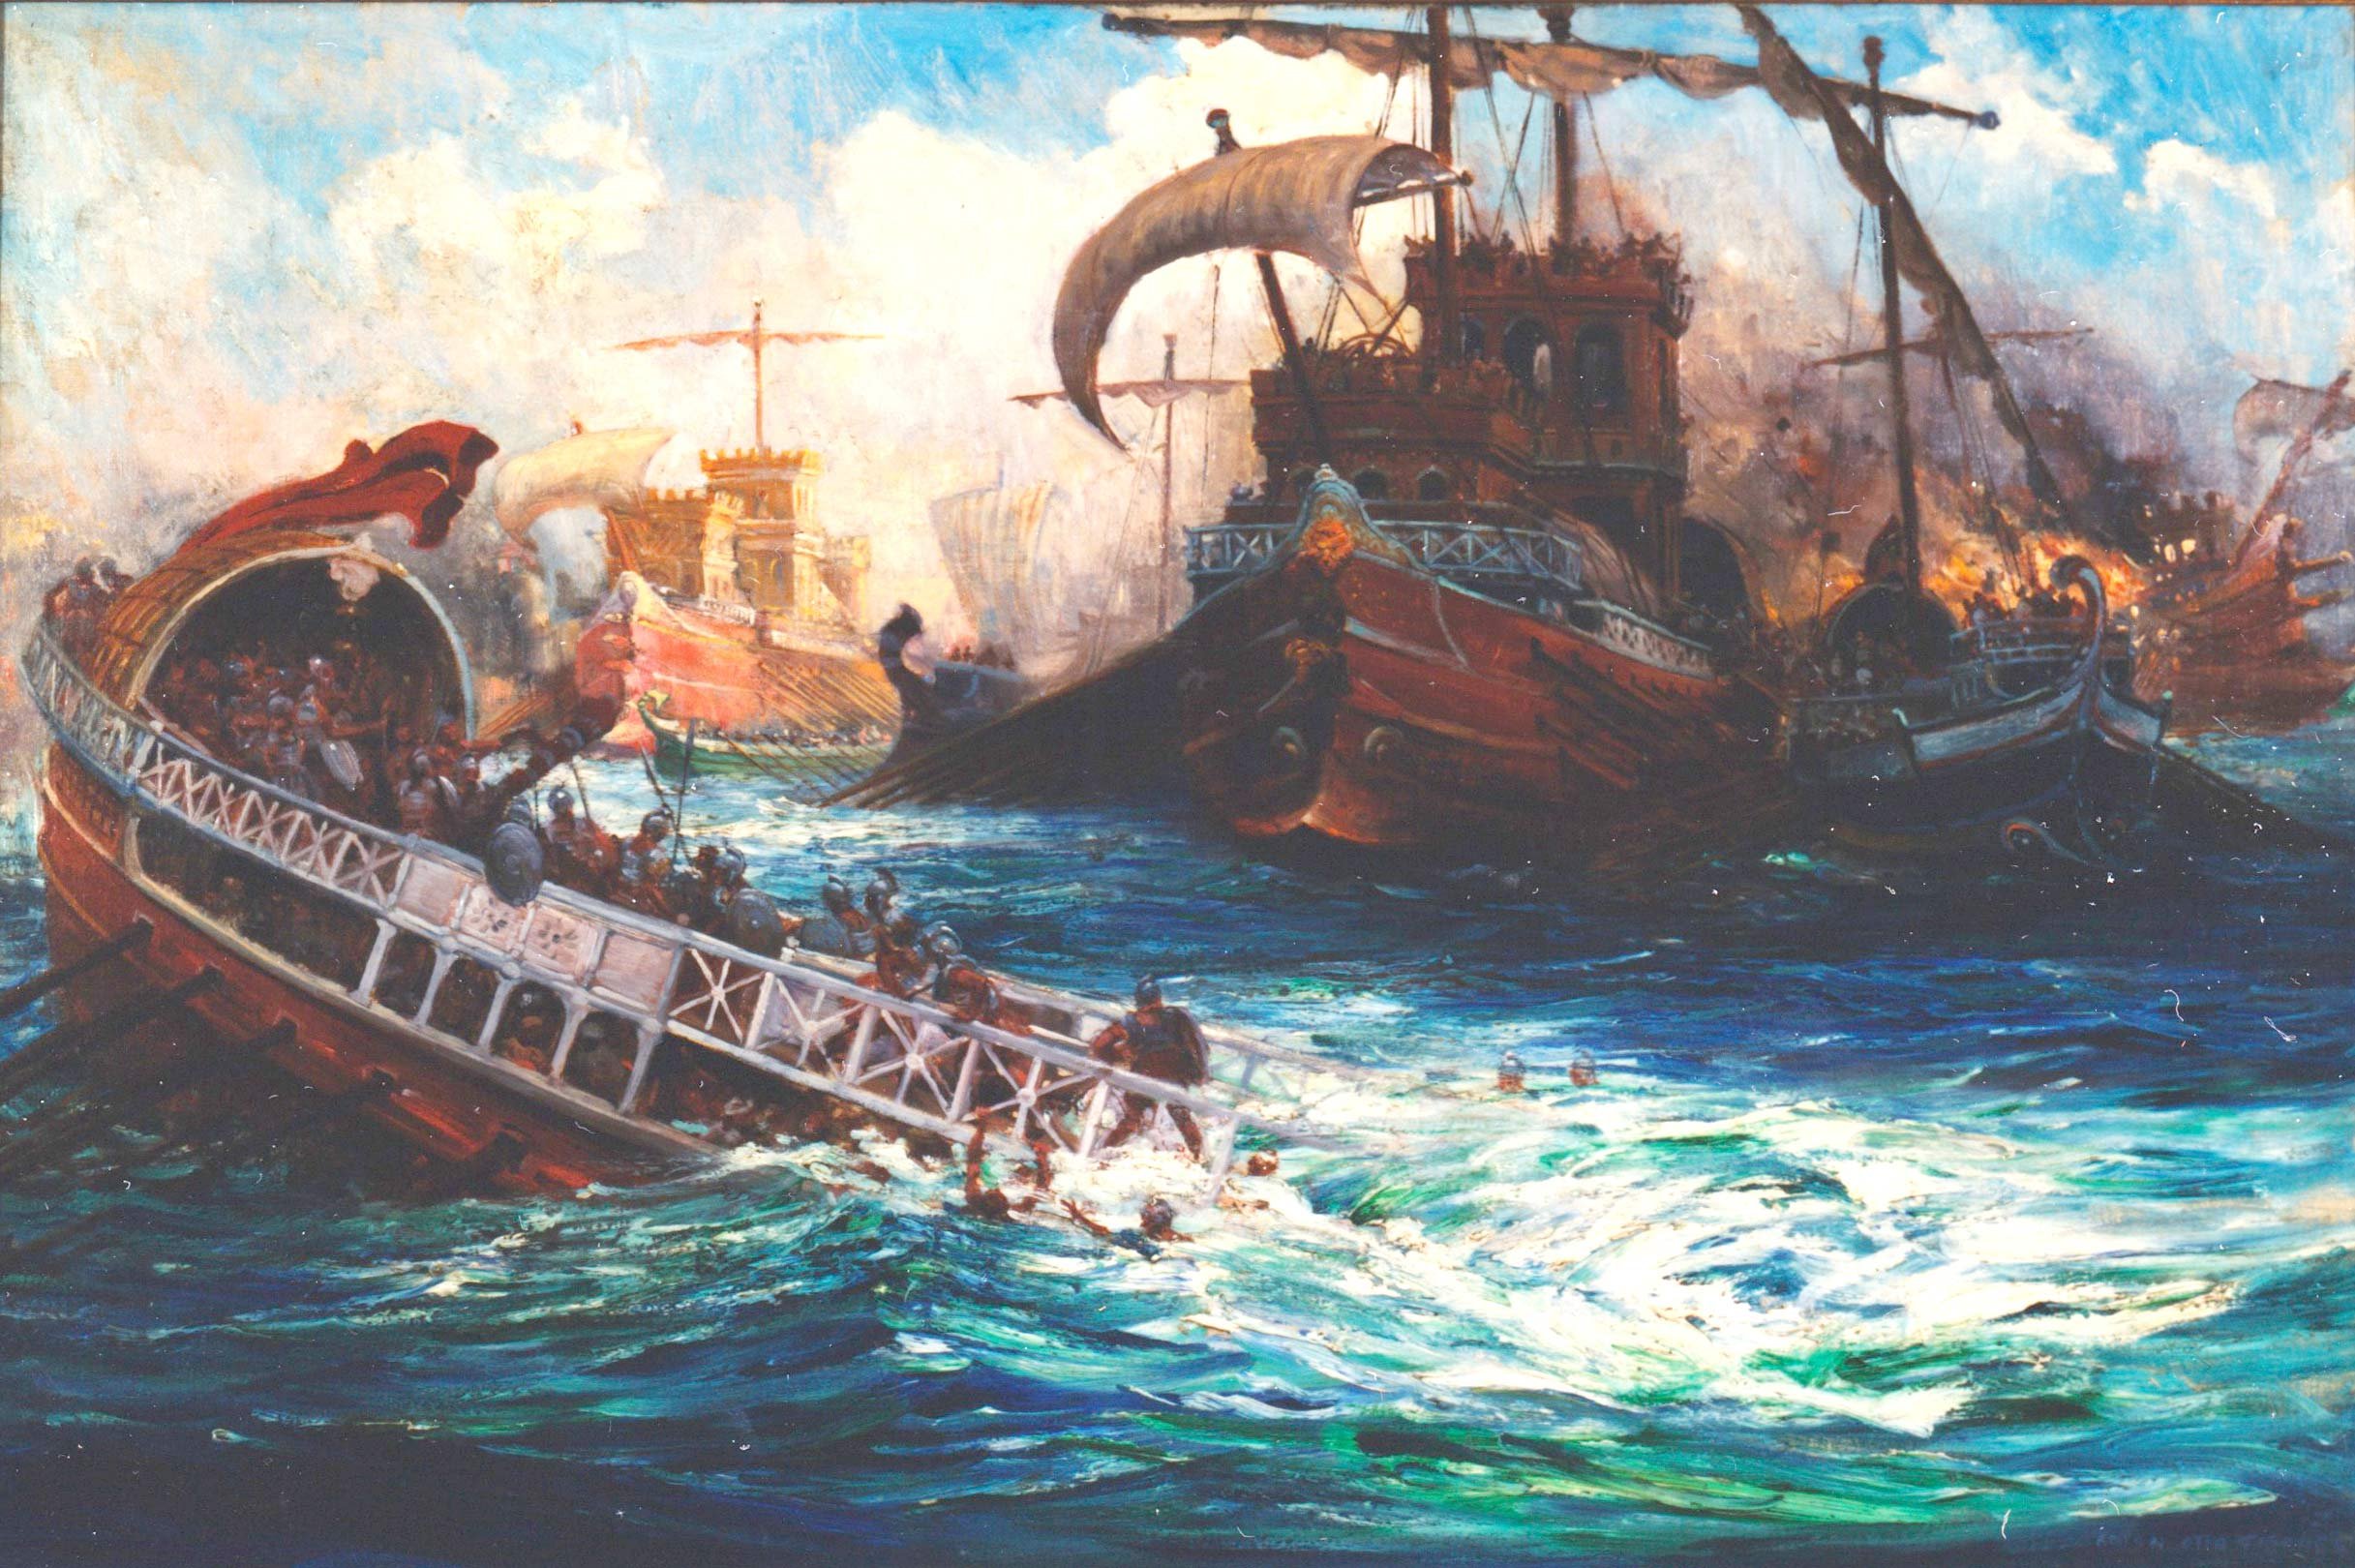   Anton Otto Fischer (1882-1962)   Ancient Marine Engagement  Oil on canvas 24” x 36”, signed and dated lower right  Saturday Evening Post,  F. Britten Austin, 1928 